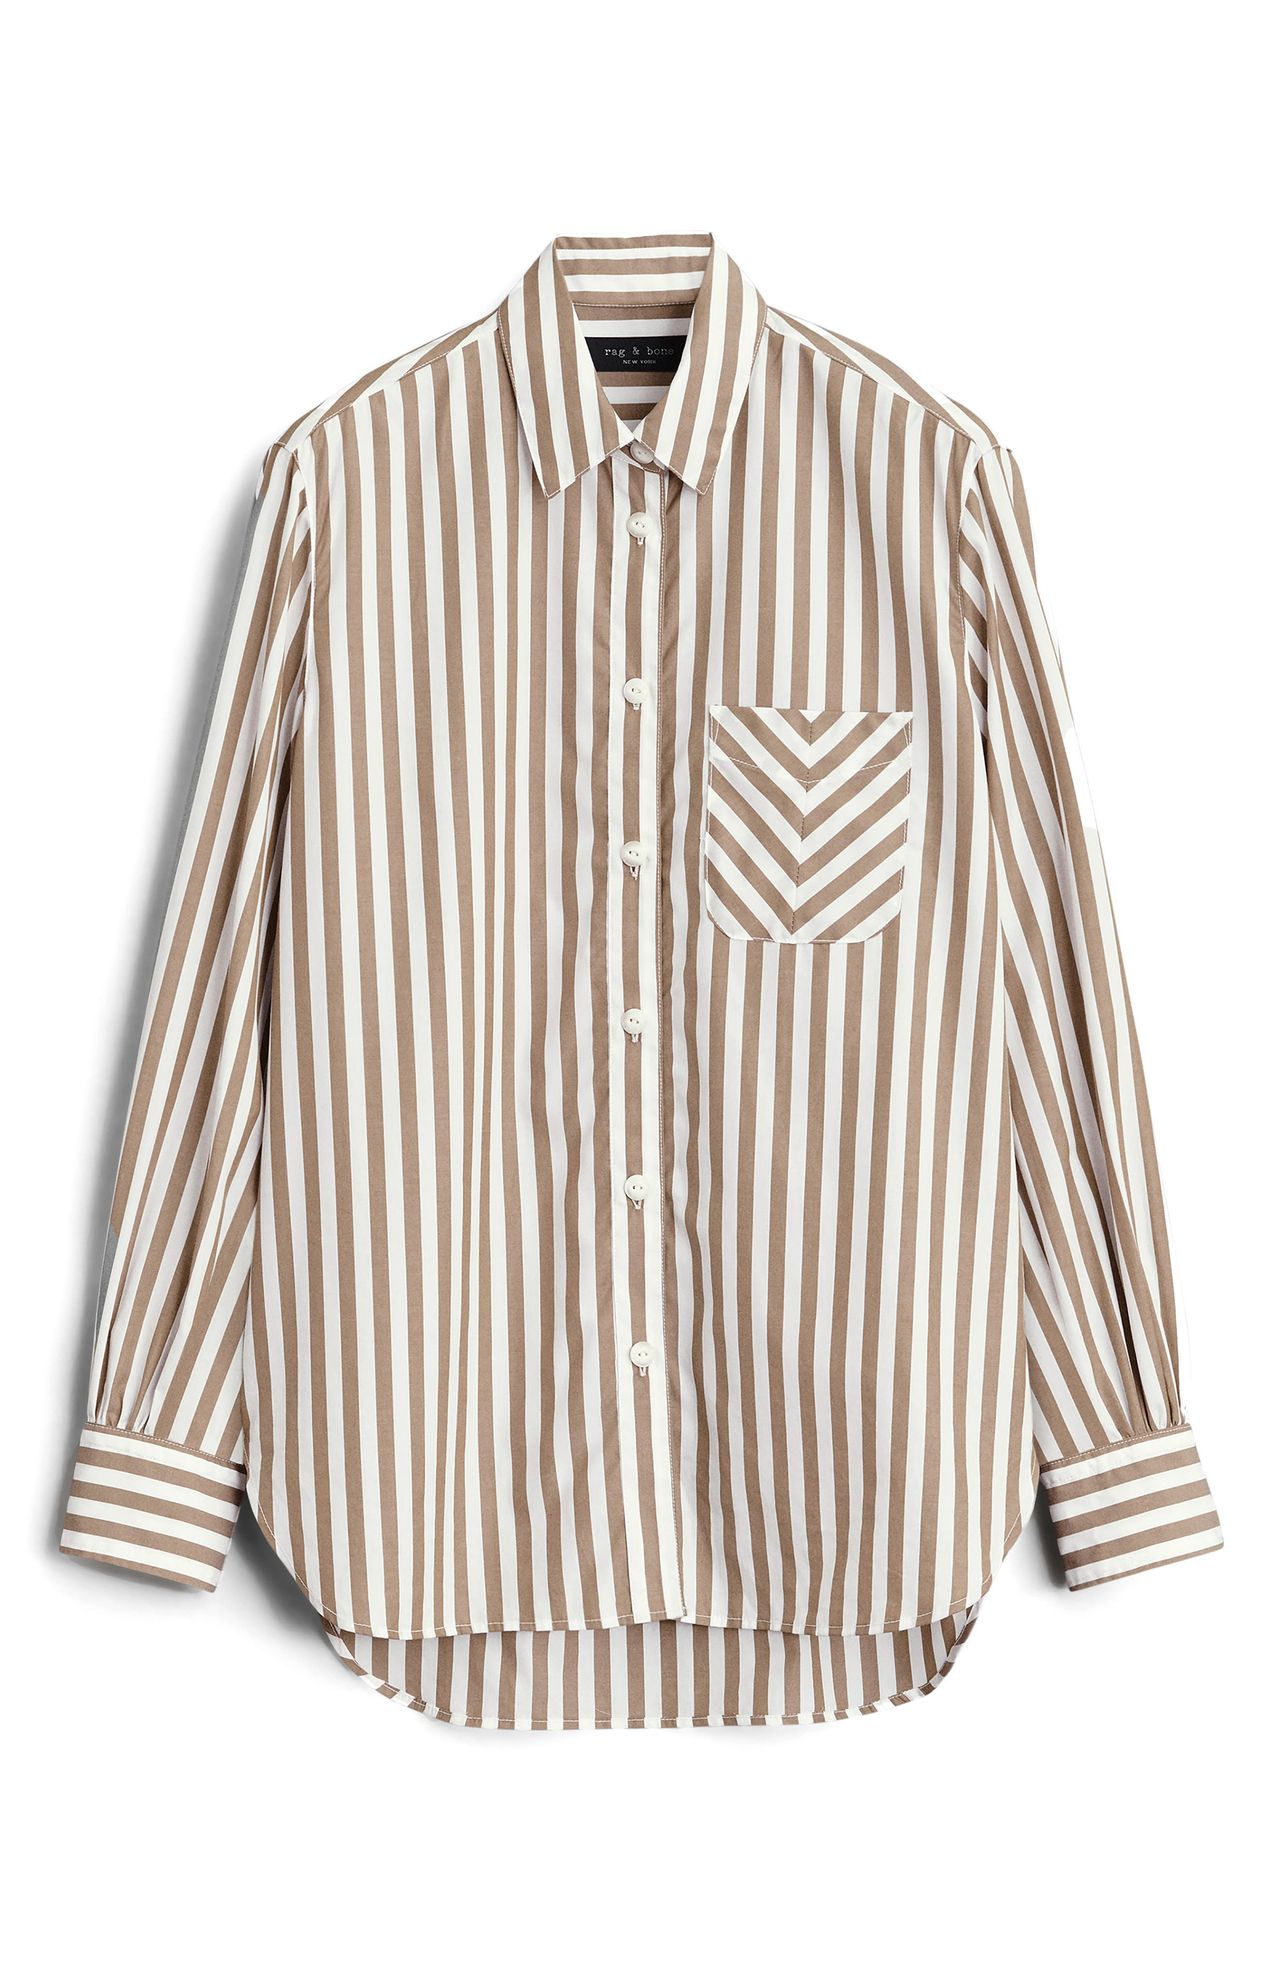 12 Chic Striped Shirts and How to Style Them | Who What Wear